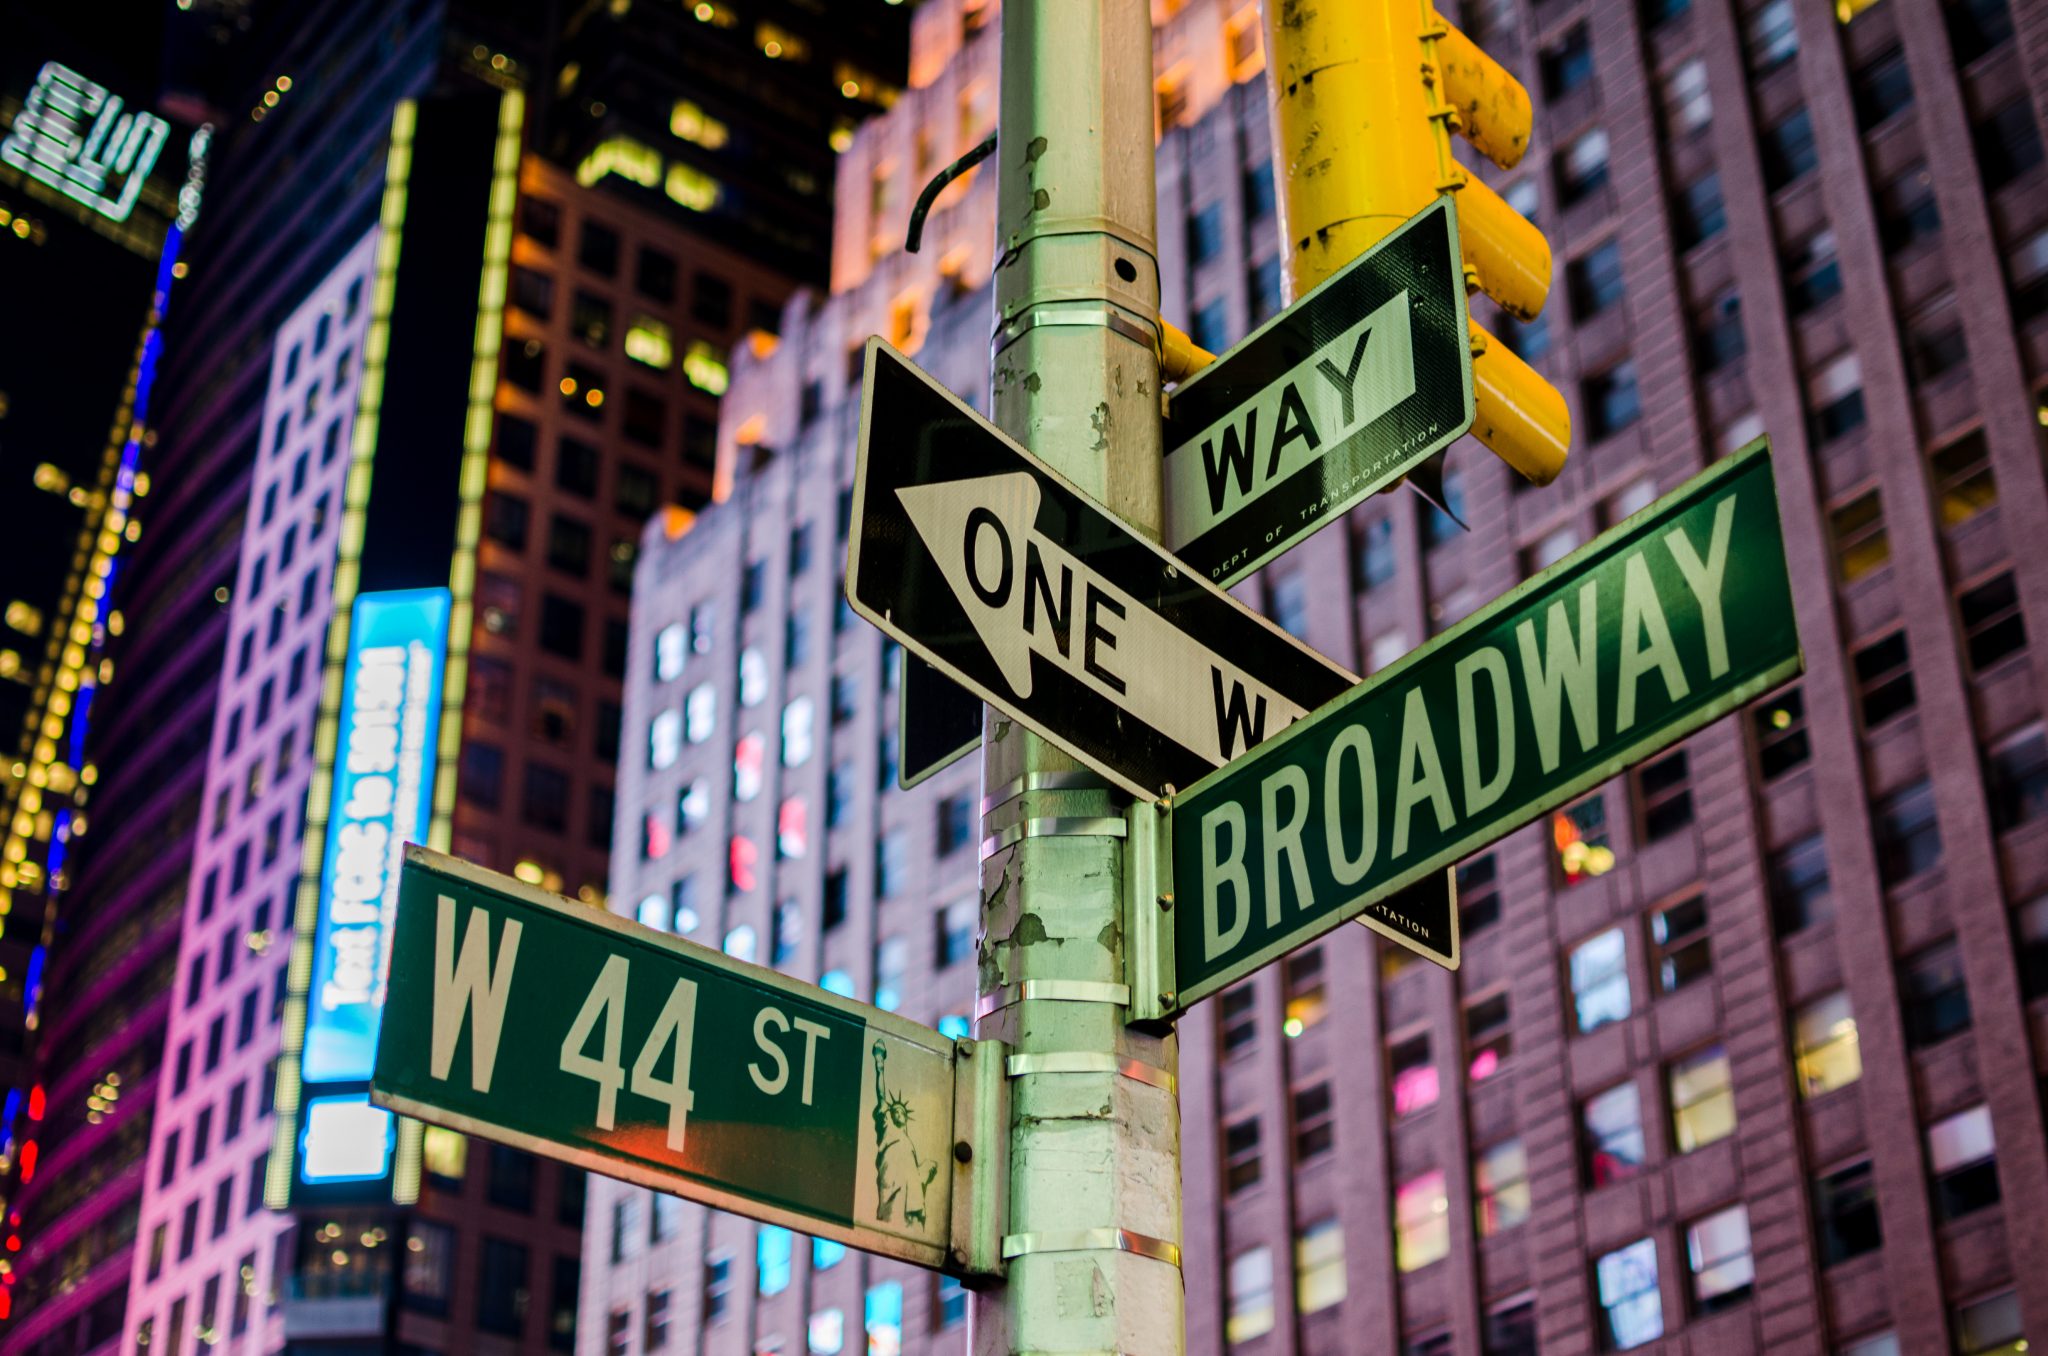 Broadway,And,44st,Street,Signs,,Manhattan,,New,York,City,At The